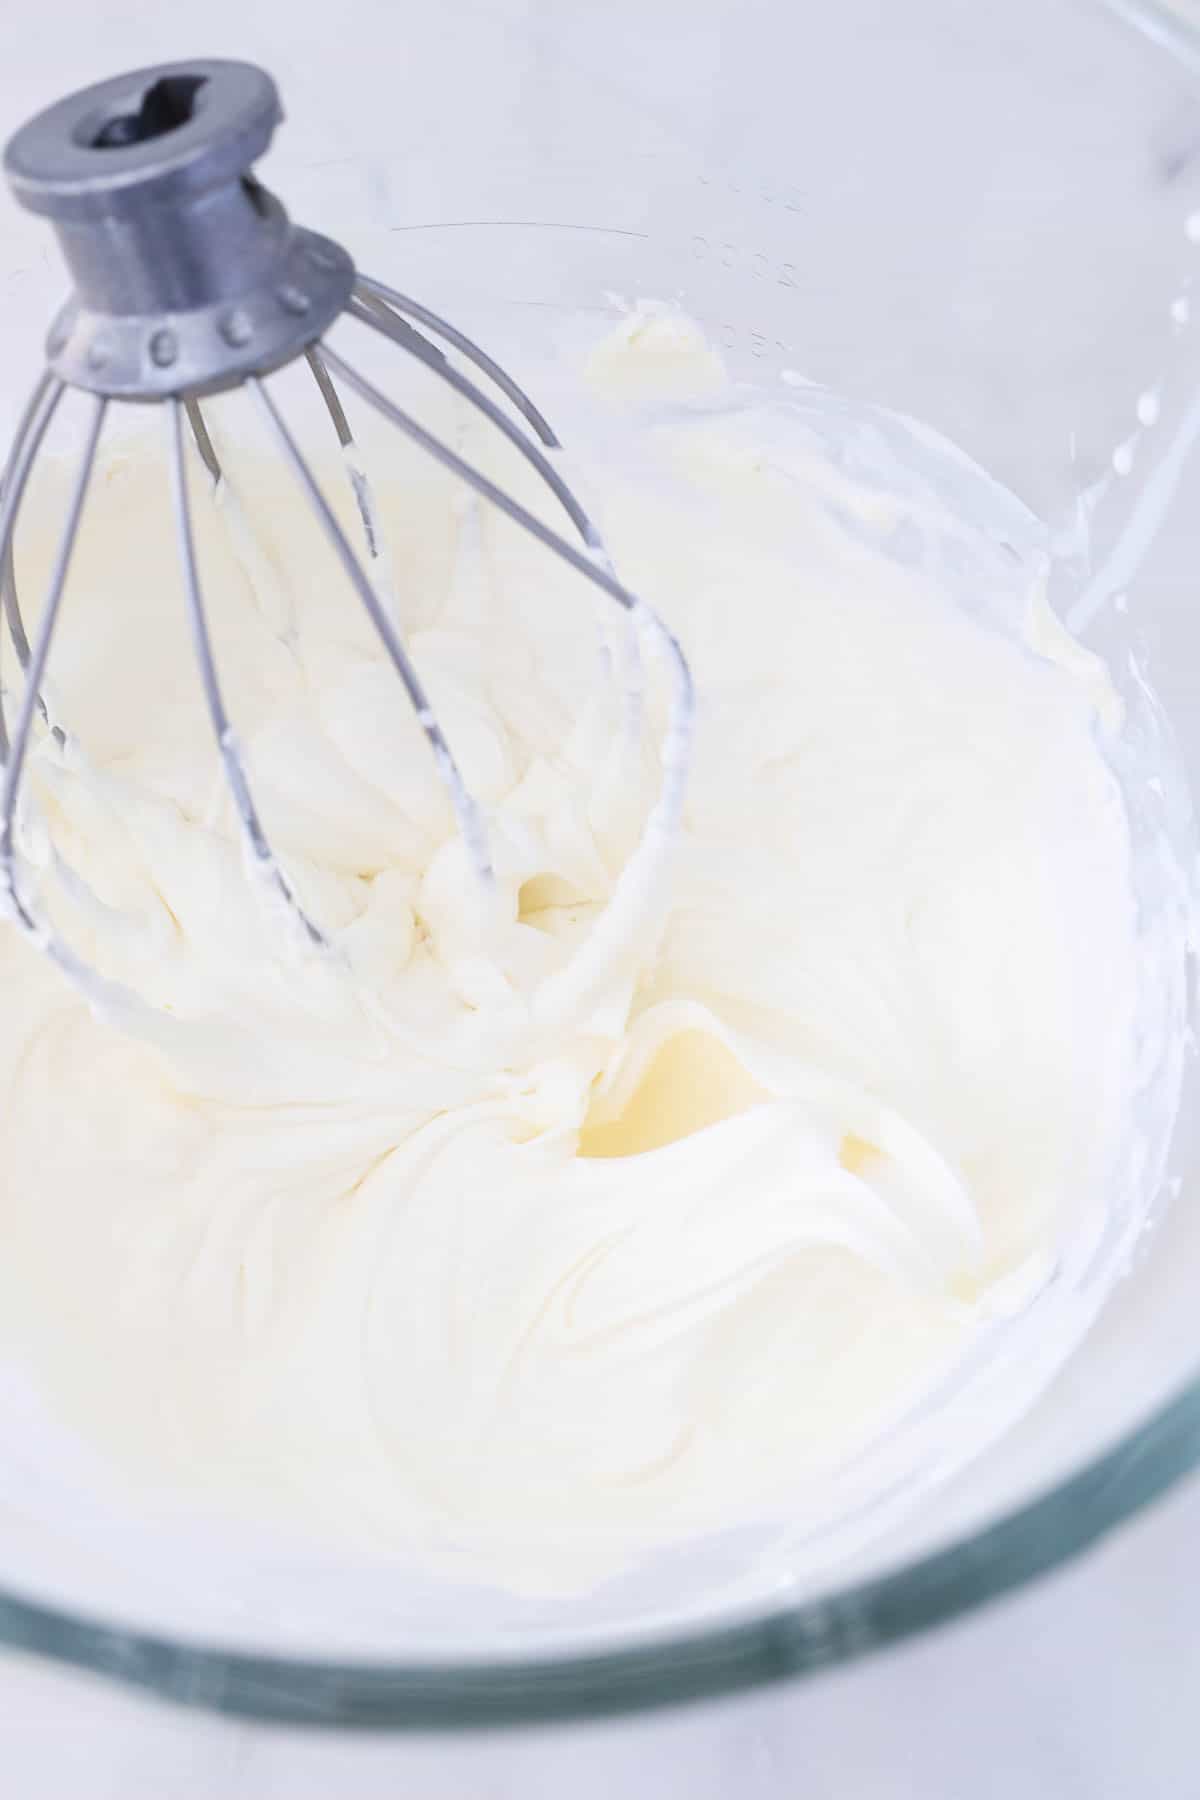 Mascarpone whipped cream inside a glass mixing bowl with a stand mixer whisk attachment.